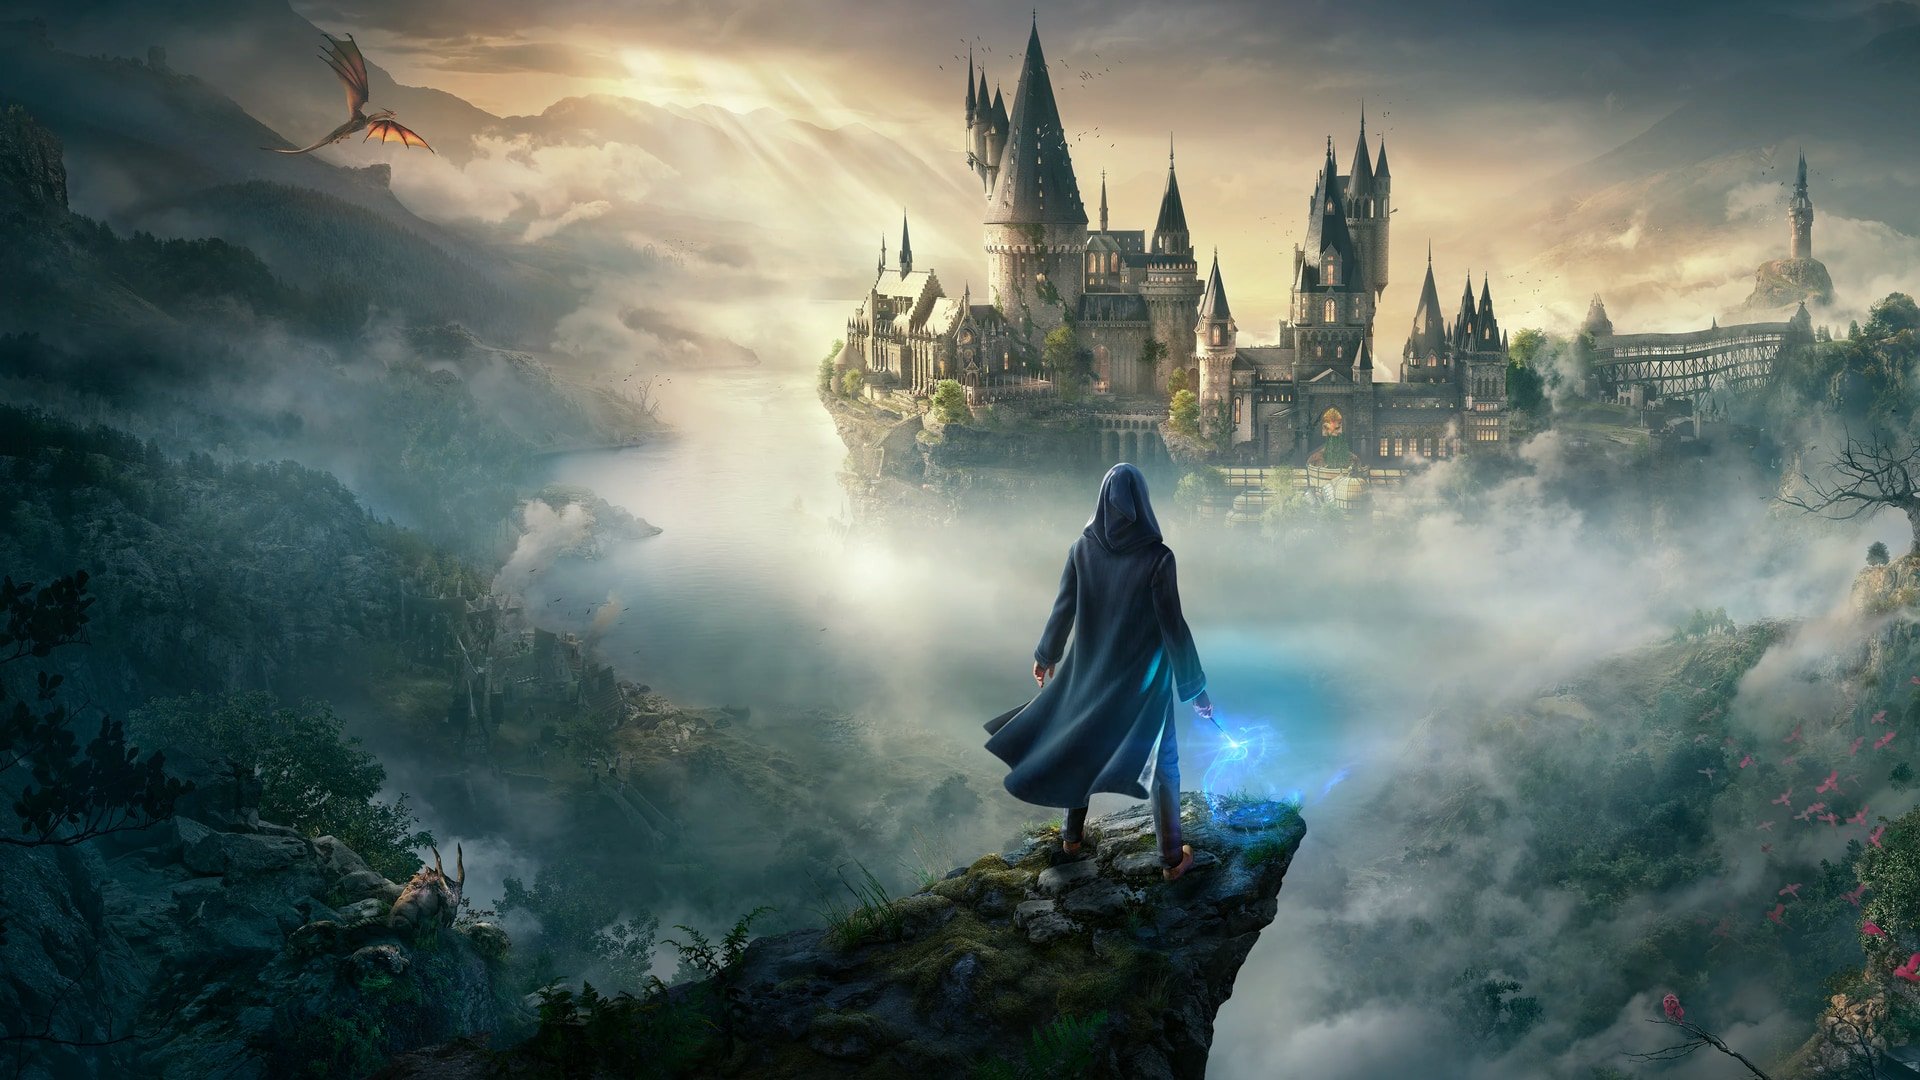 Hogwarts Legacy Sales Dominated PS5 Download Chart for February